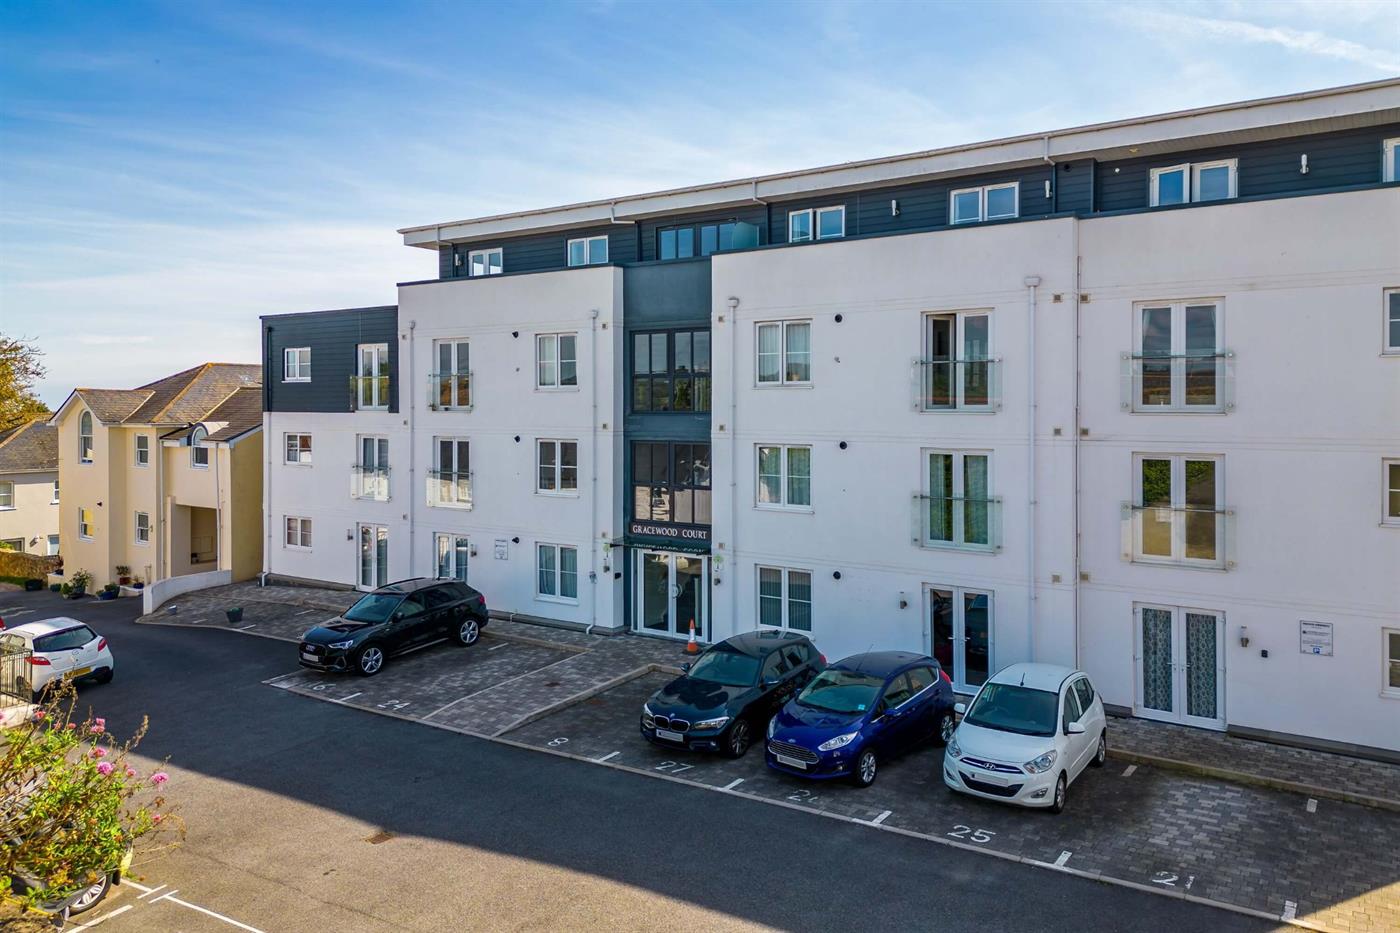 2 Bedroom Apartment for Sale: Grace Wood Court, Petitor Road, St Marychurch, Torquay, TQ1 4FS